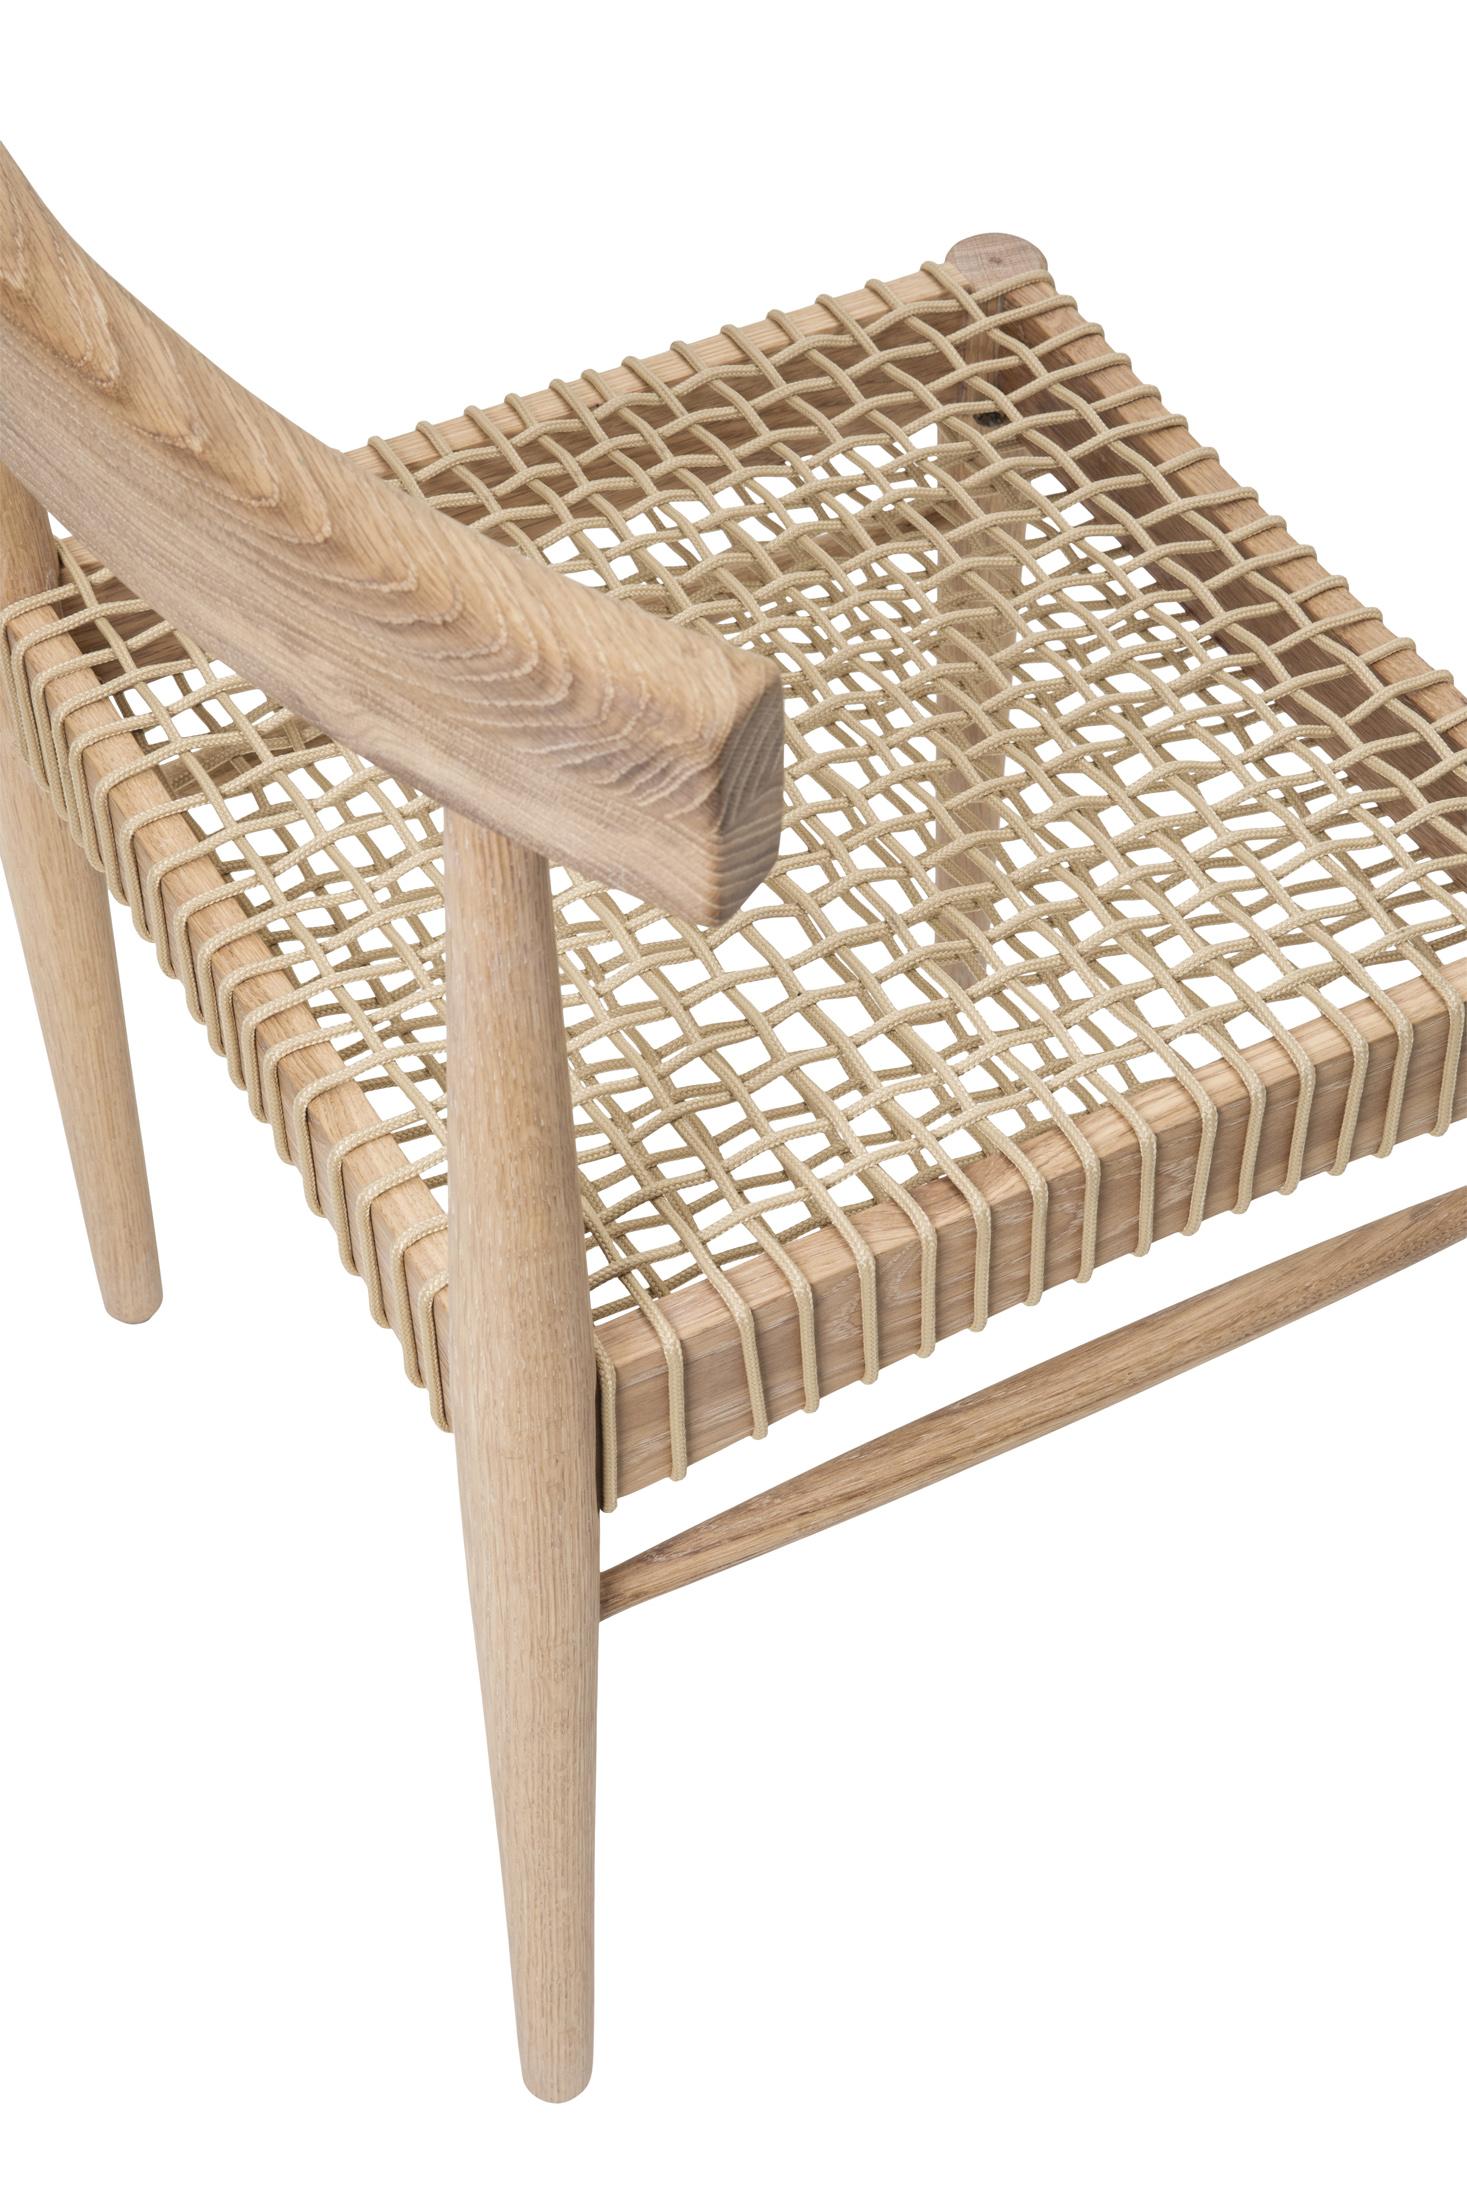 Che Chair - Natural